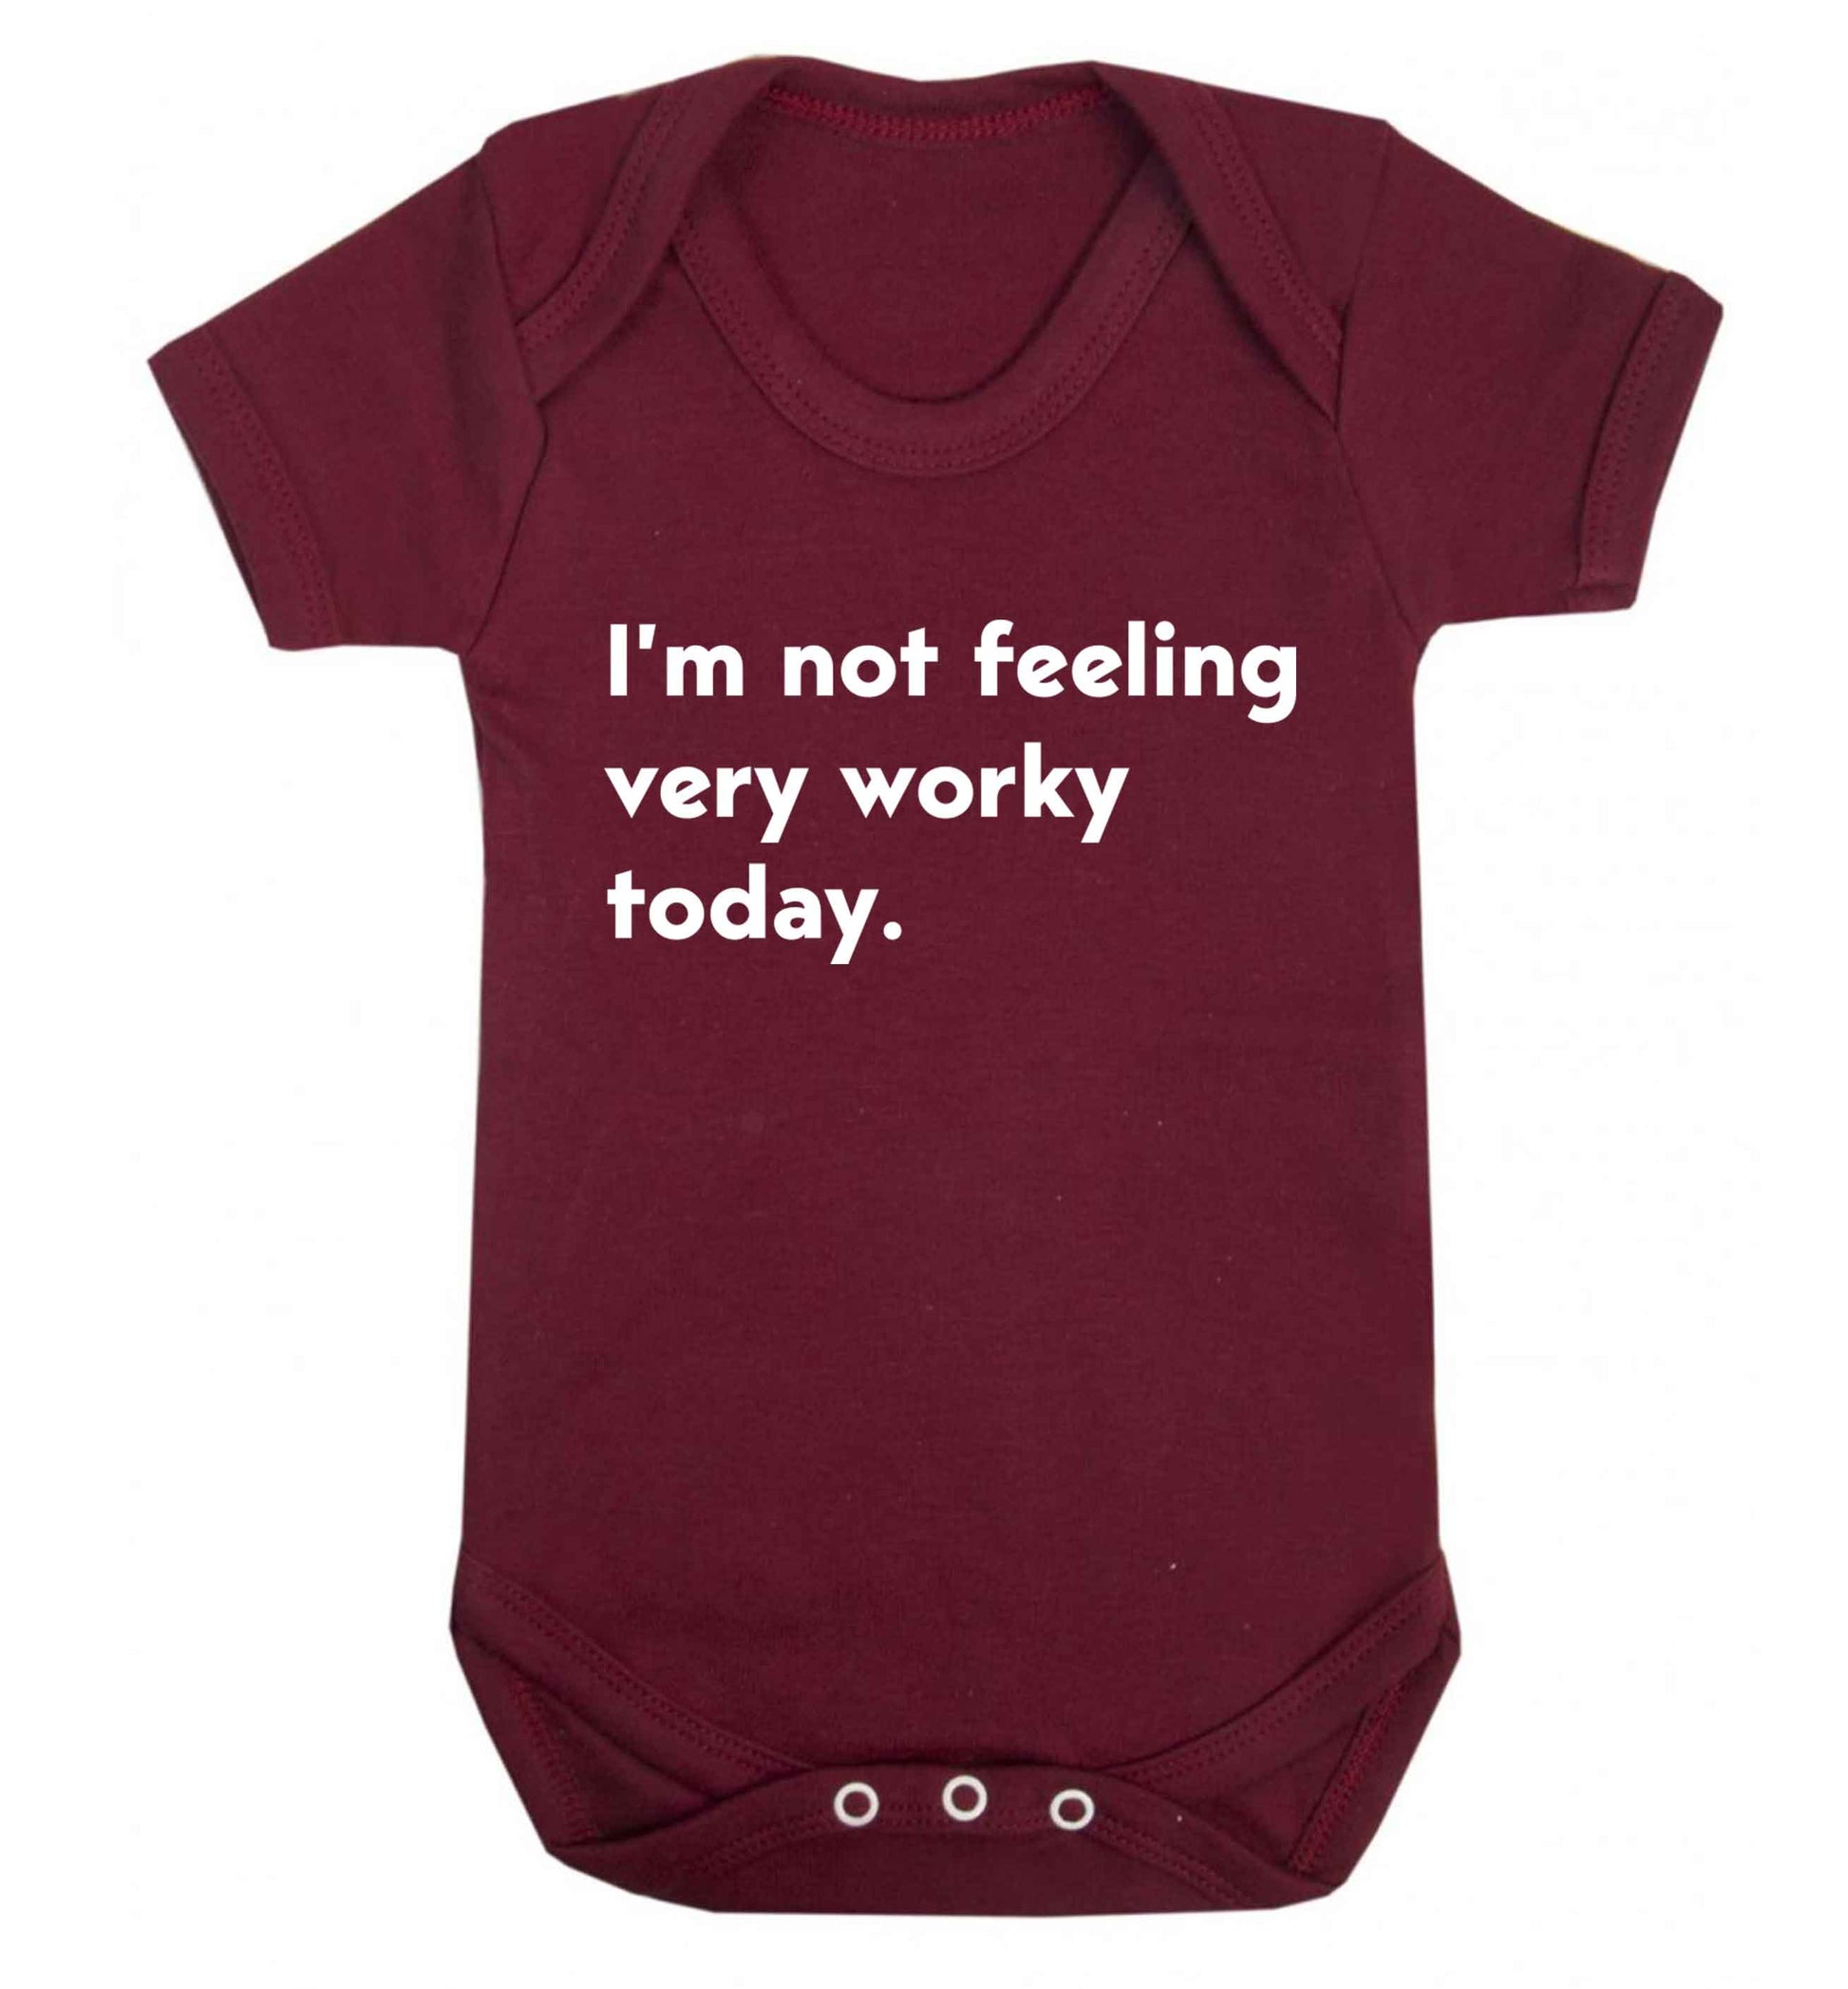 I'm not feeling very worky today Baby Vest maroon 18-24 months